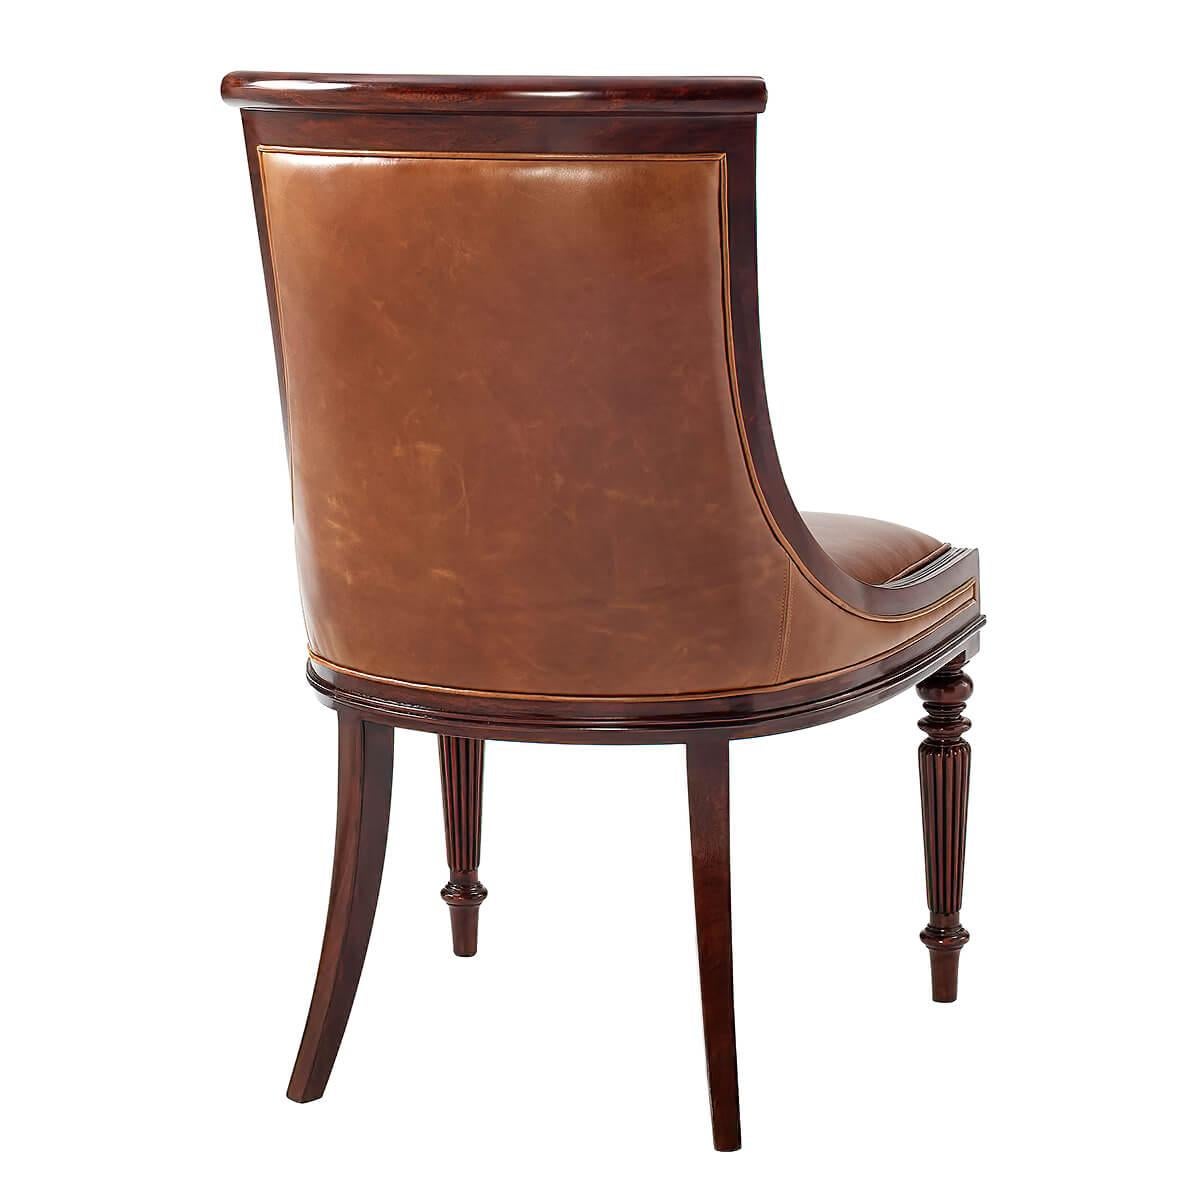 A Regency style mahogany dining chair with a hand-carved mahogany scoop back, the paneled and upholstered back above an upholstered seat, on turned and reeded legs.
Dimensions: 22.5